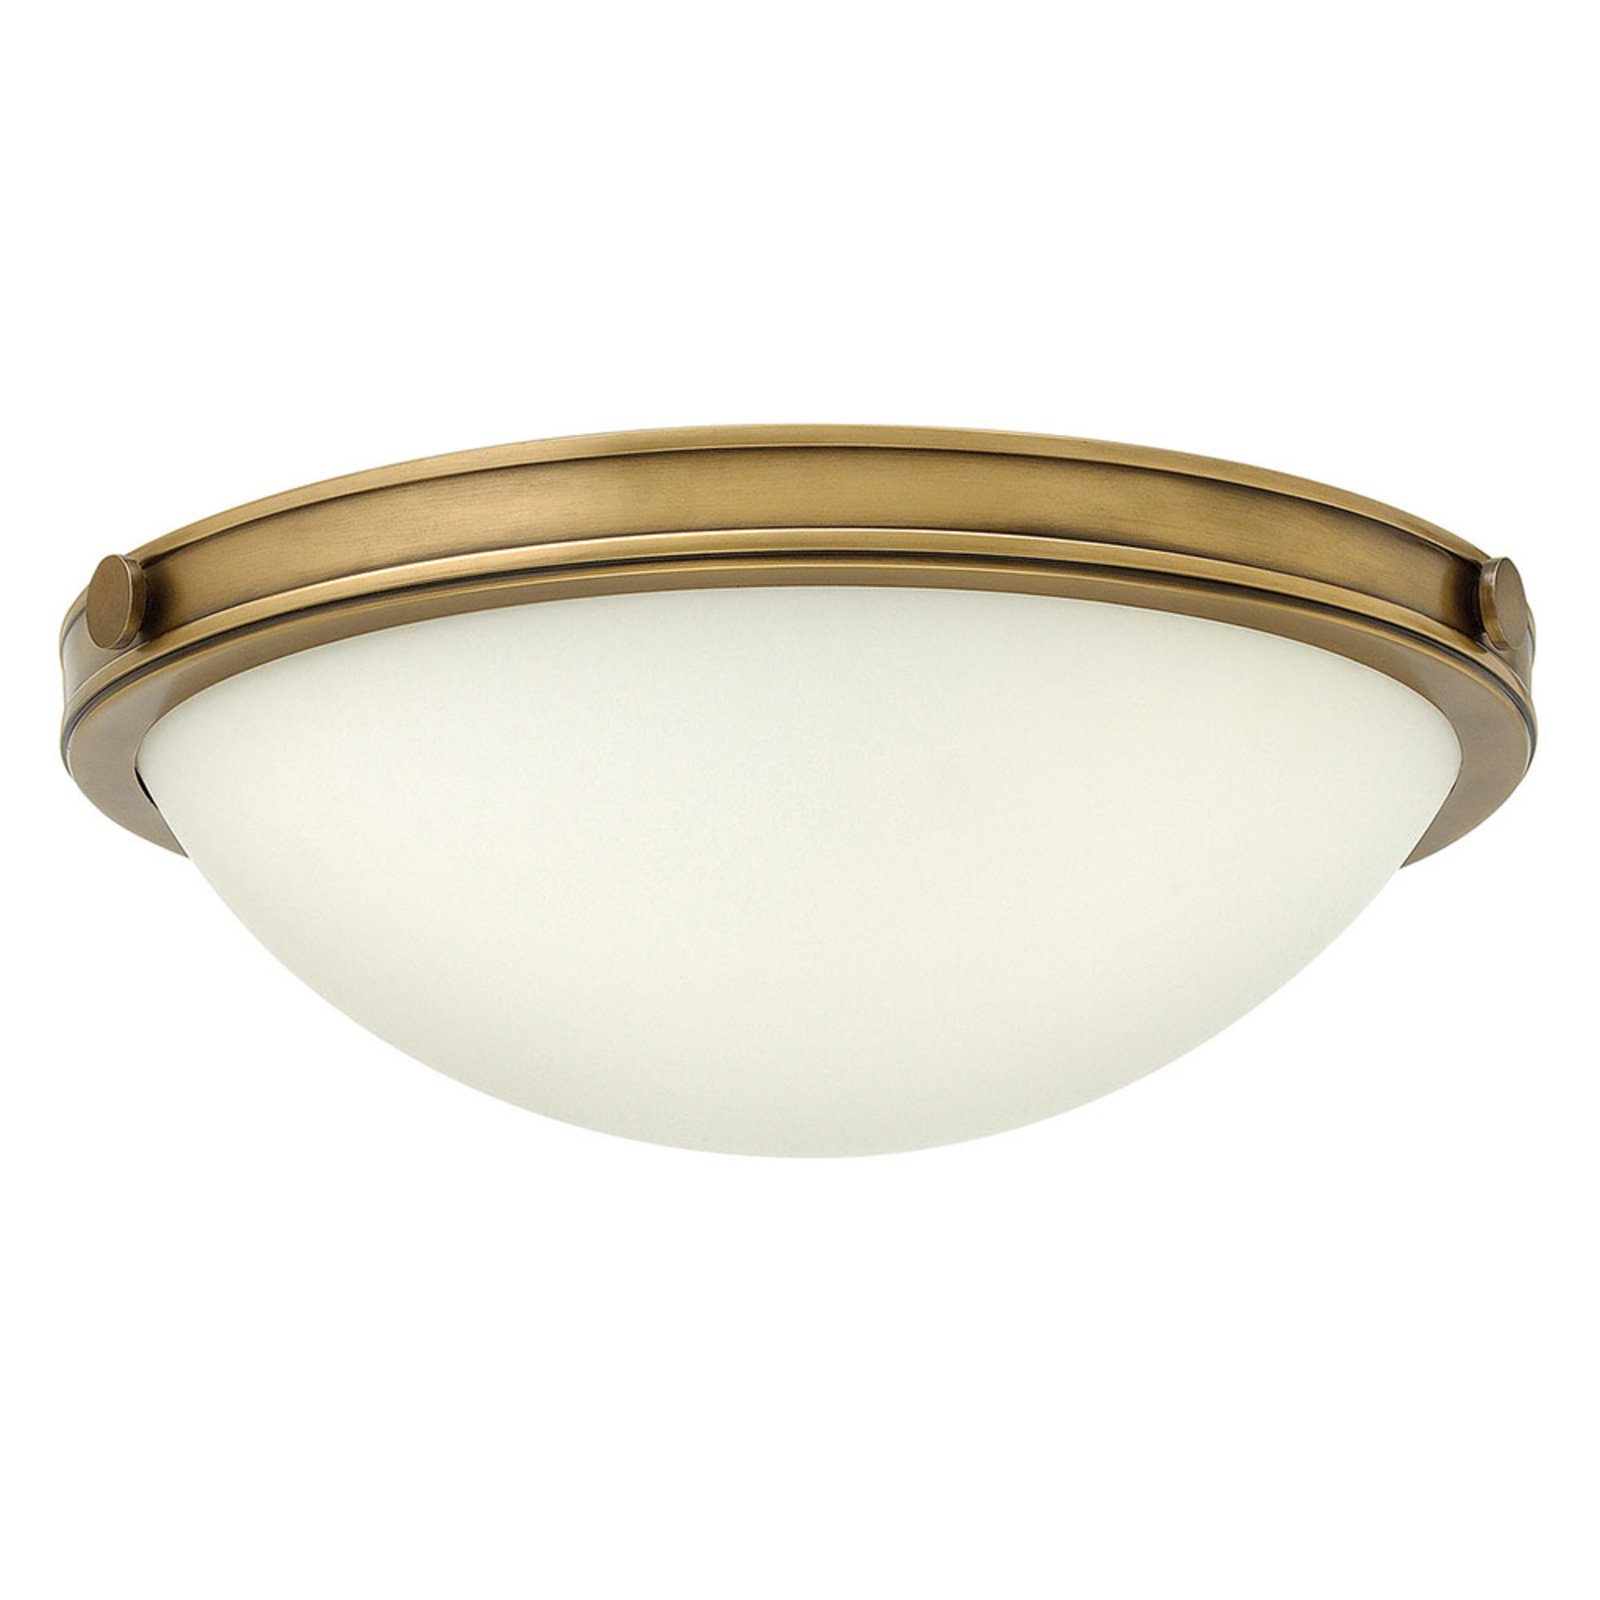 Collier ceiling light with a brass finish 34.6 cm